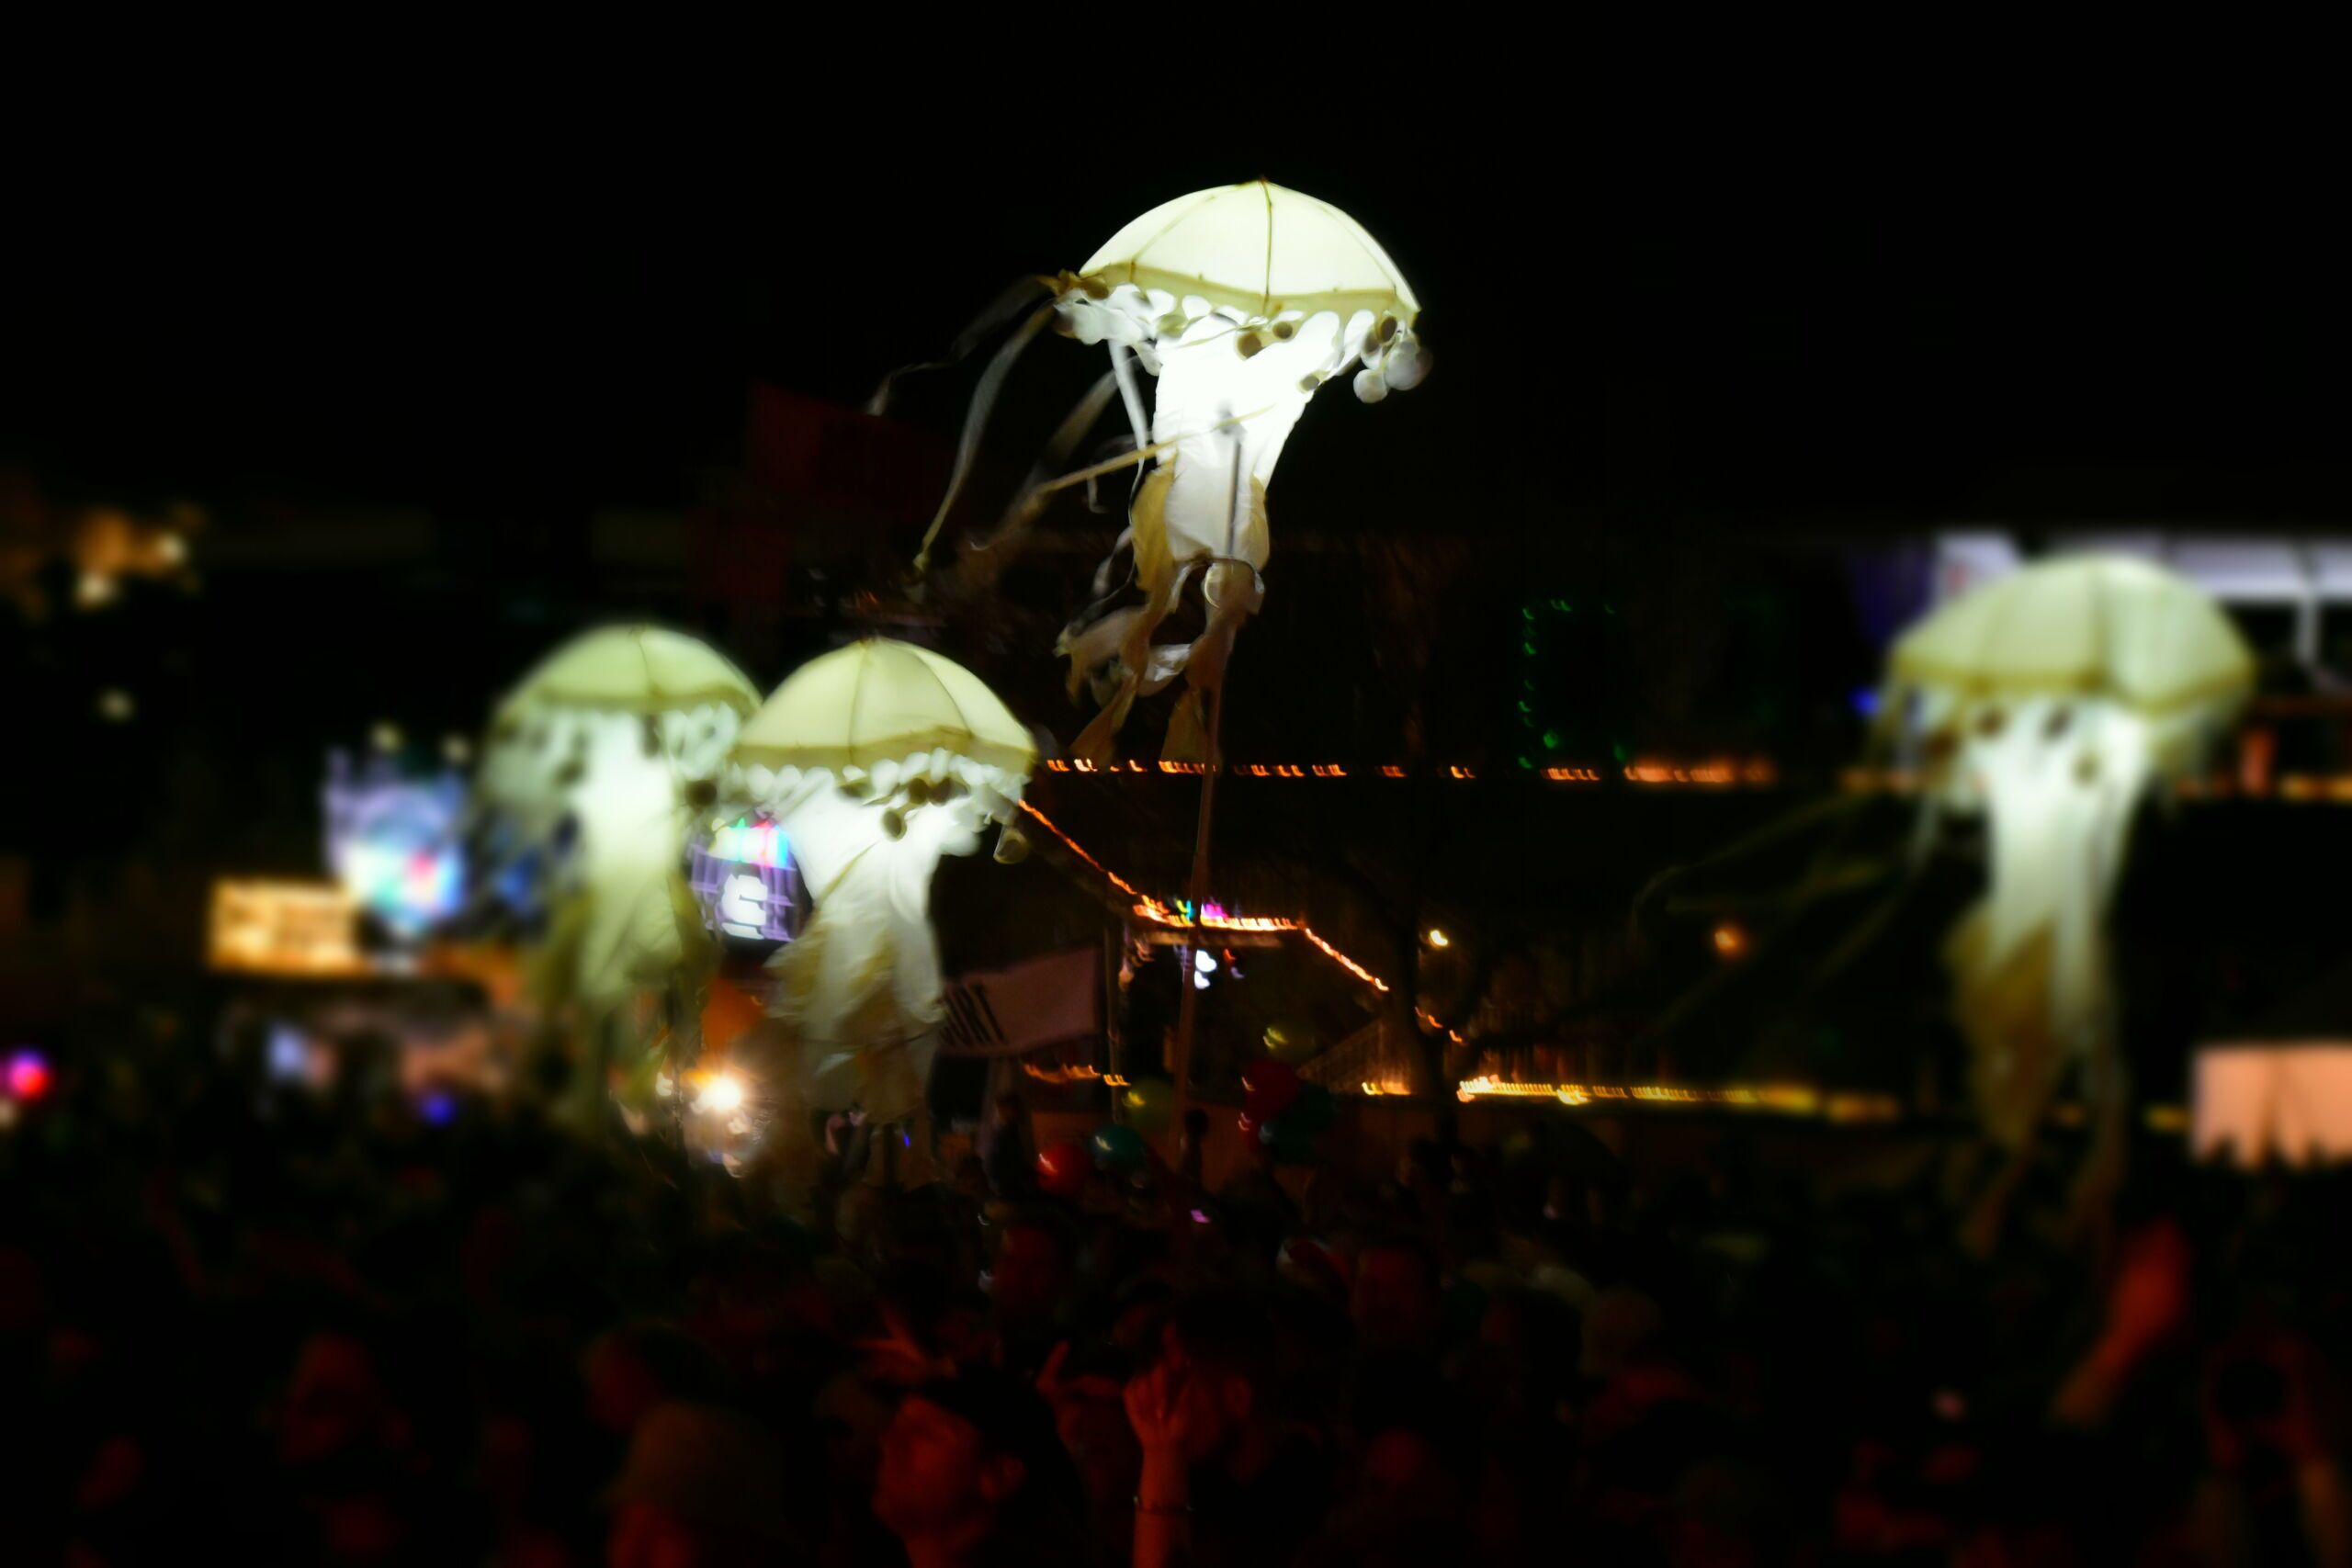 Light installations in the shape of jellyfish at the M3F music festival in Phoenix, Arizona